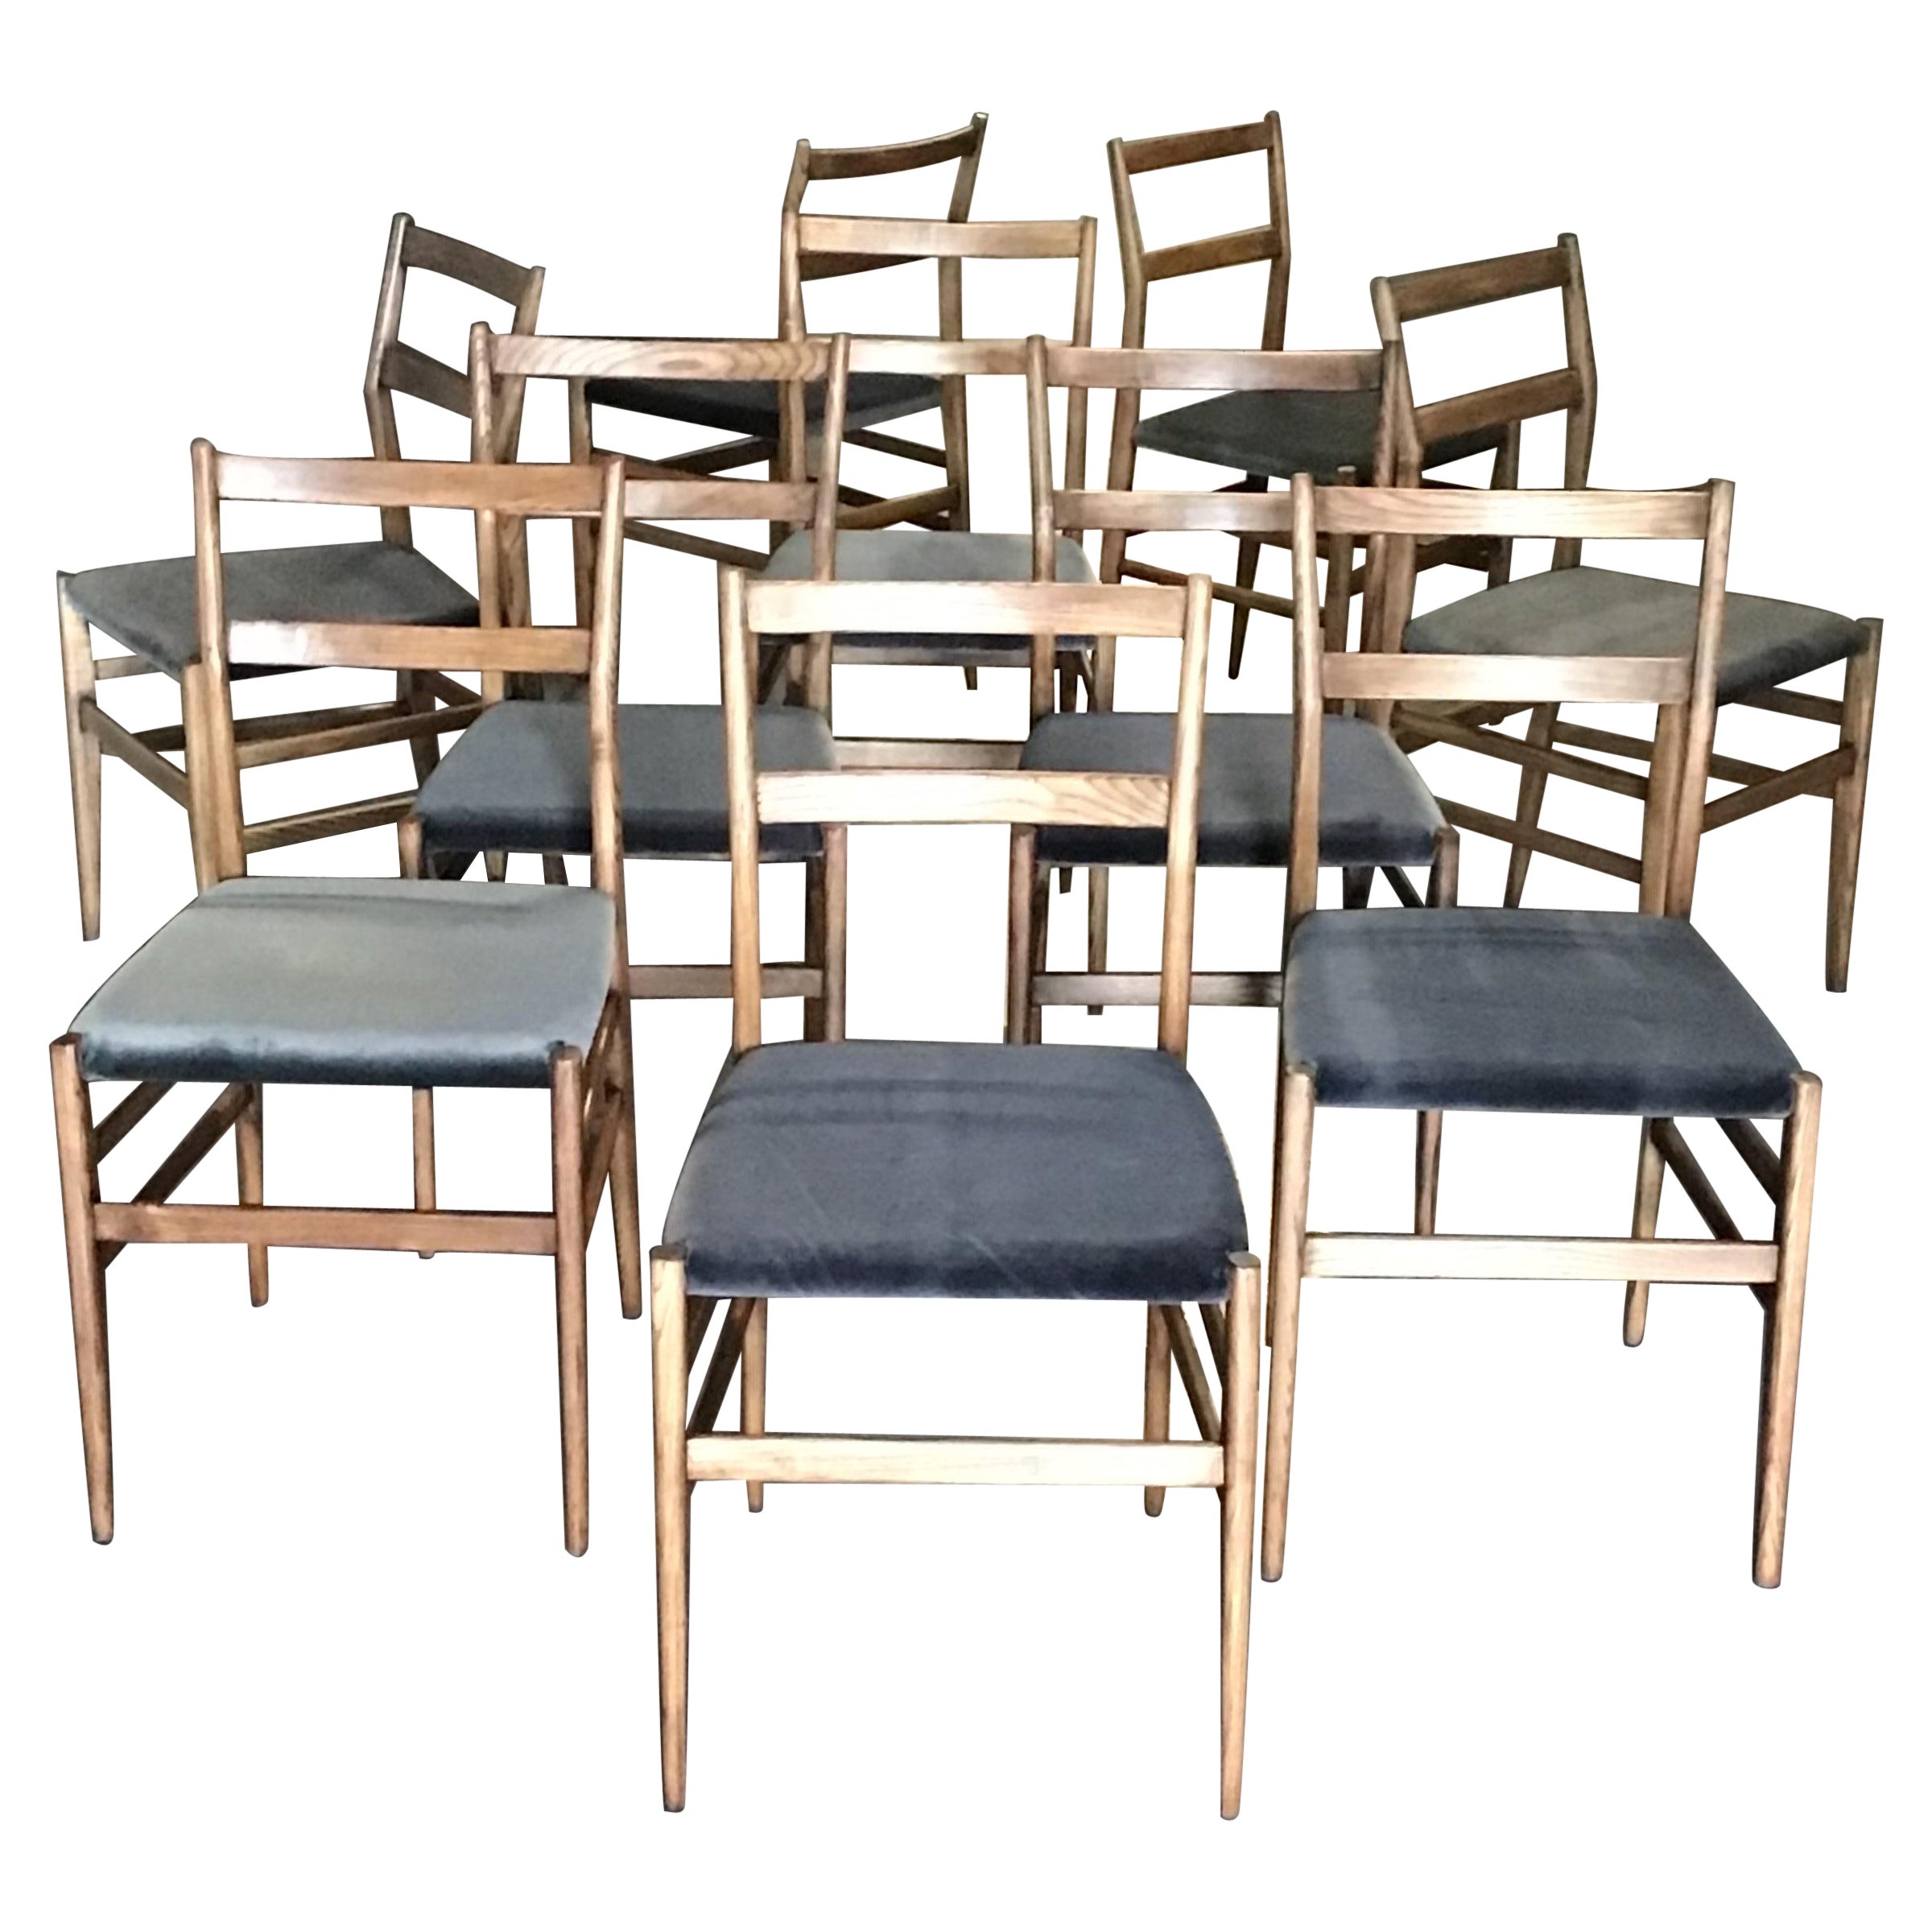 Original 1950's Gio Ponti Leggera Dining Chairs by Cassina. Set of 10  For Sale